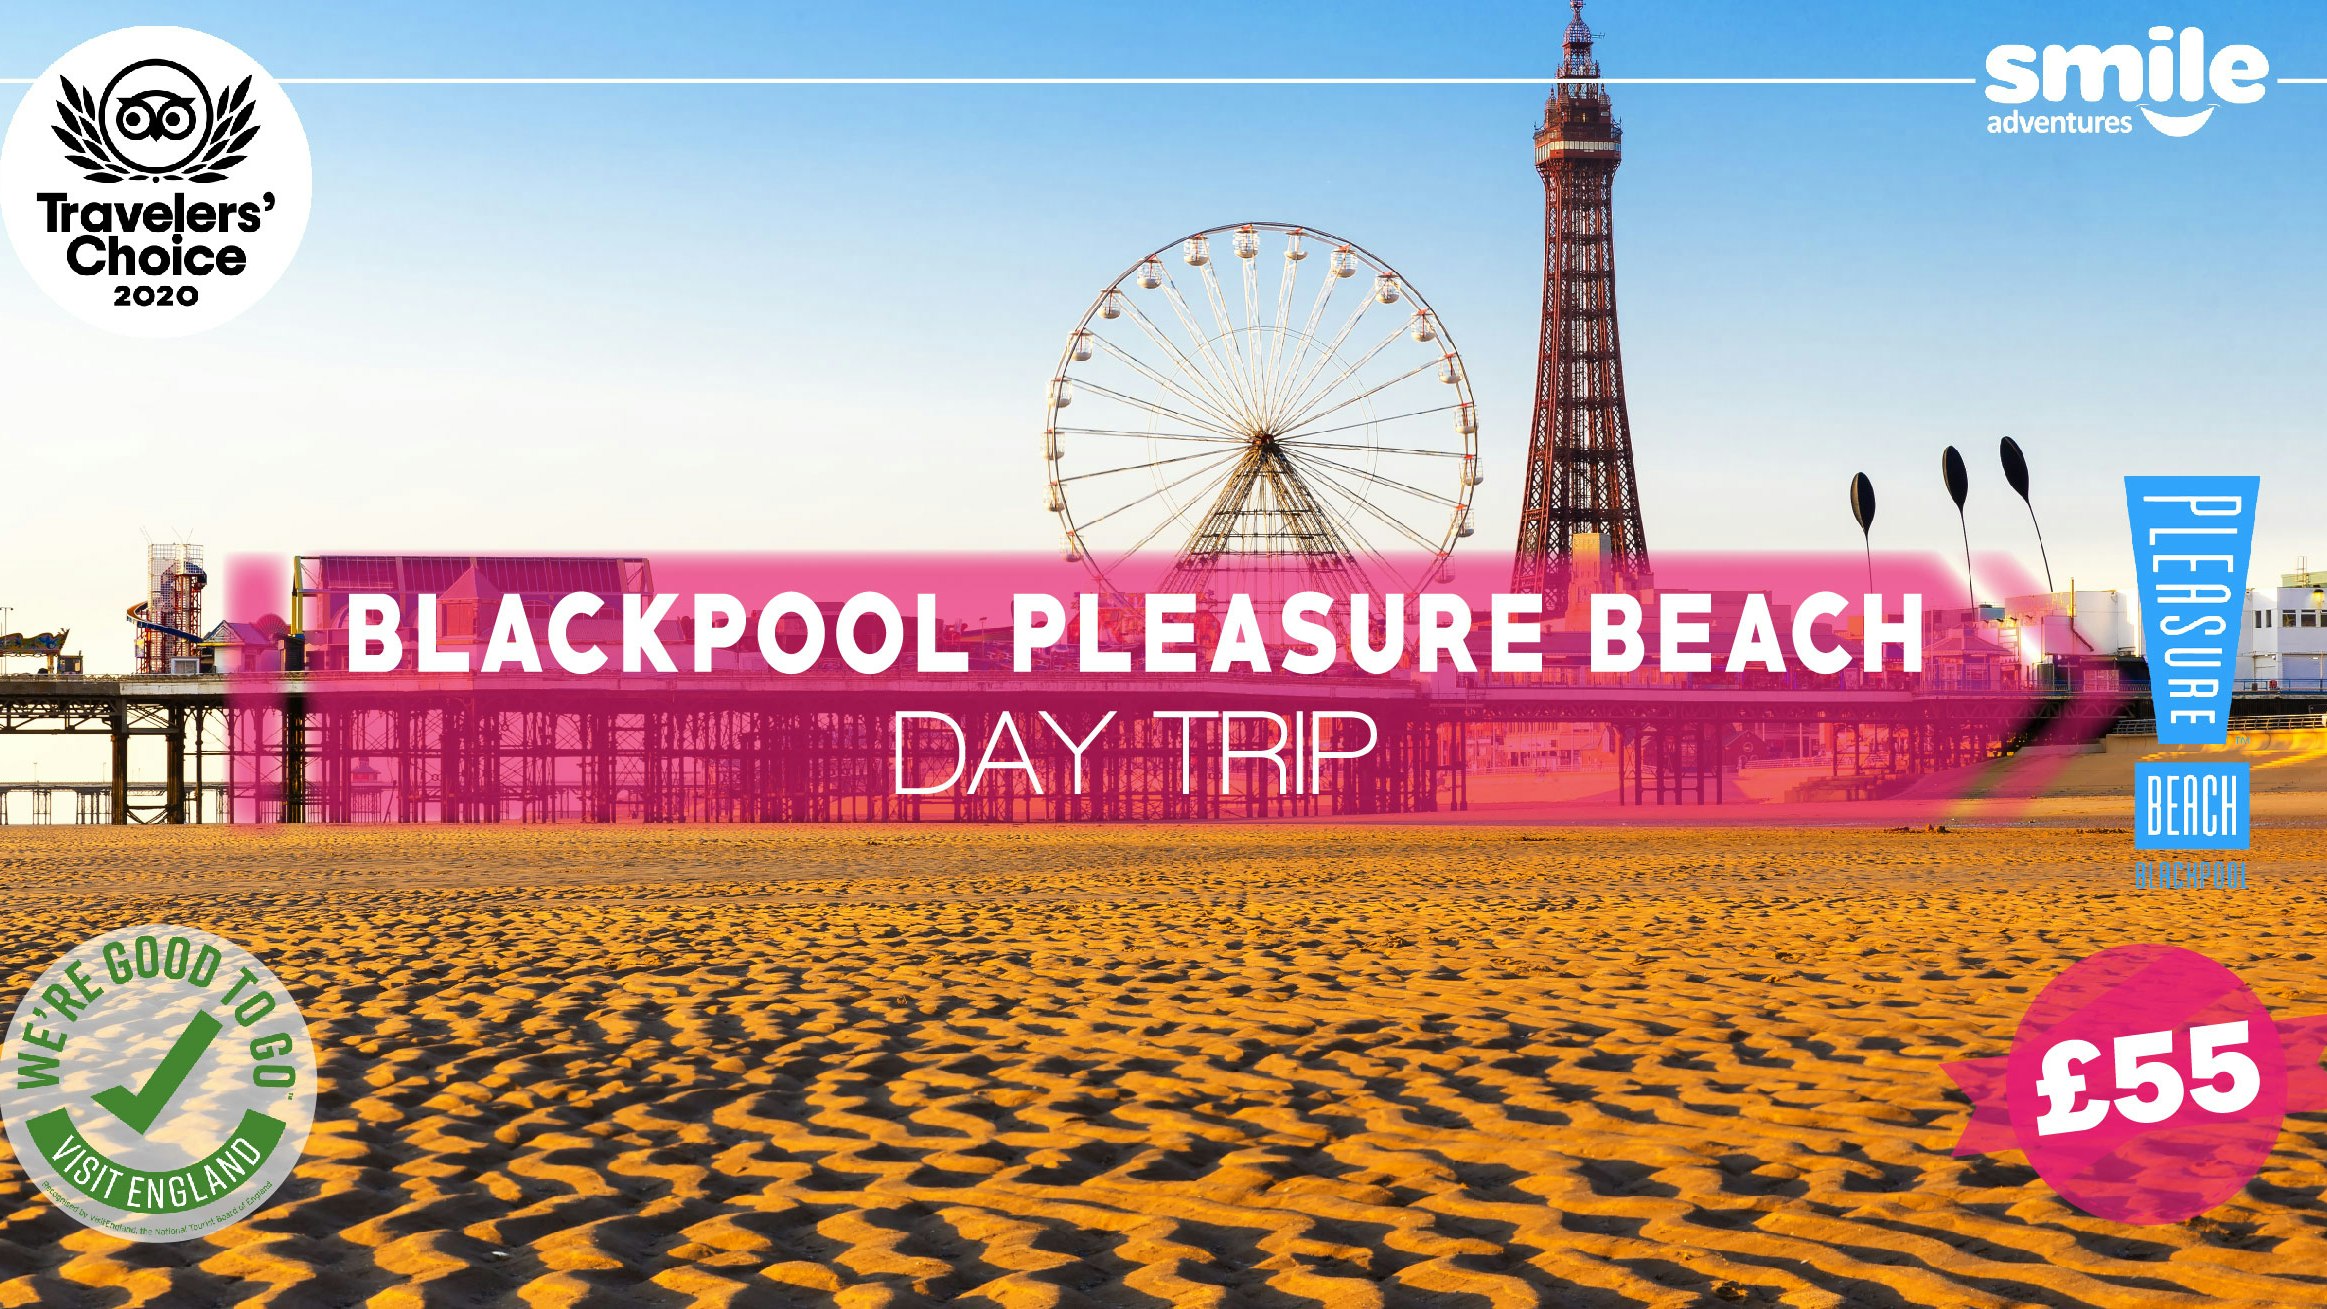 Blackpool Pleasure Beach – From Manchester